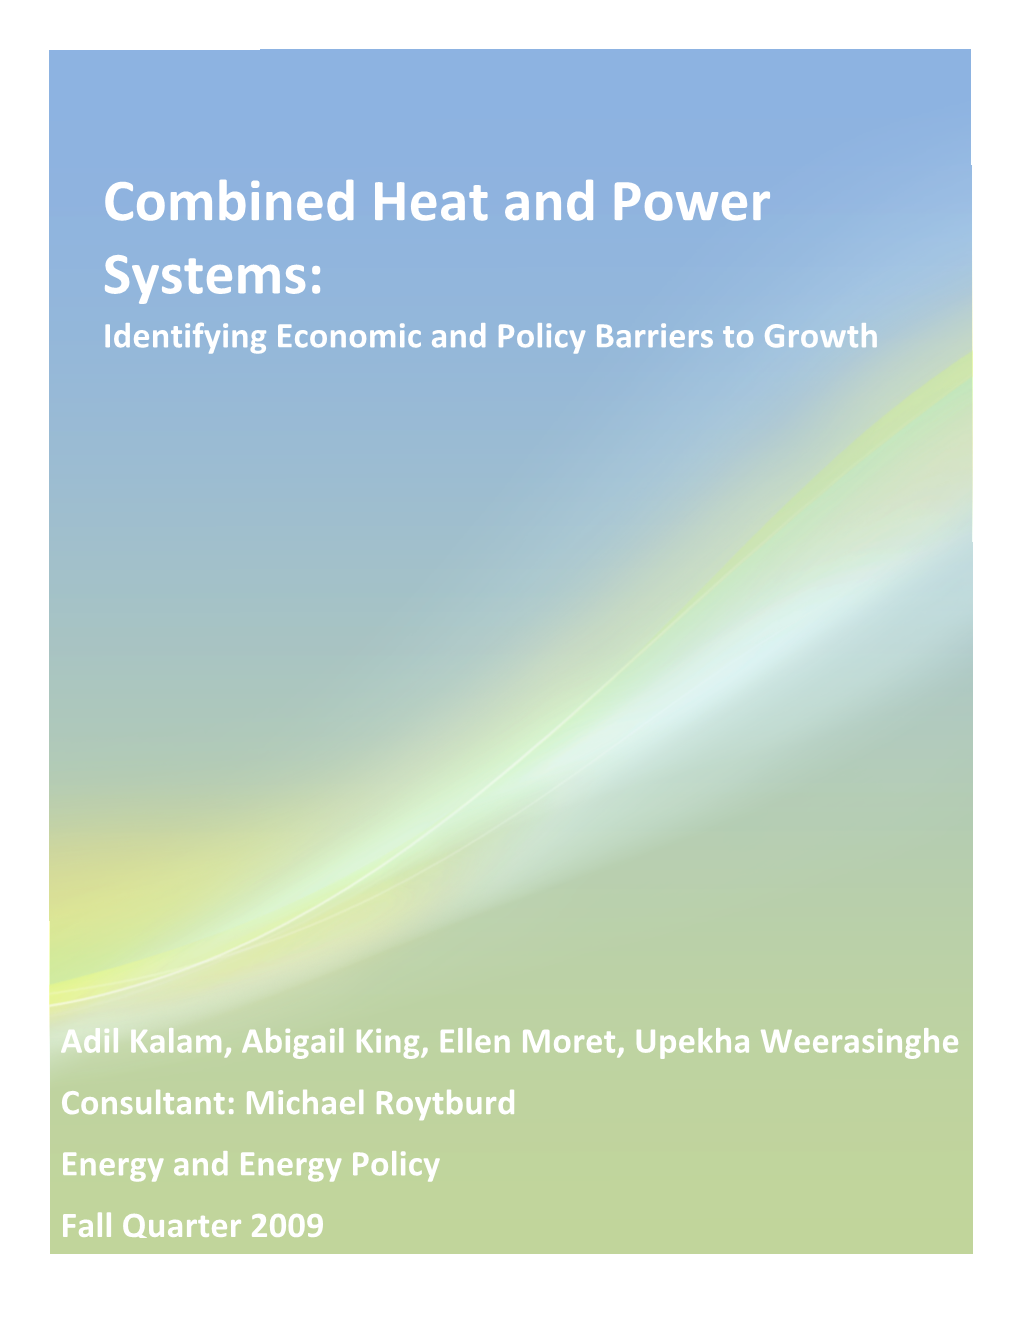 Combined Heat and Power Systems: Identifying Economic and Policy Barriers to Growth